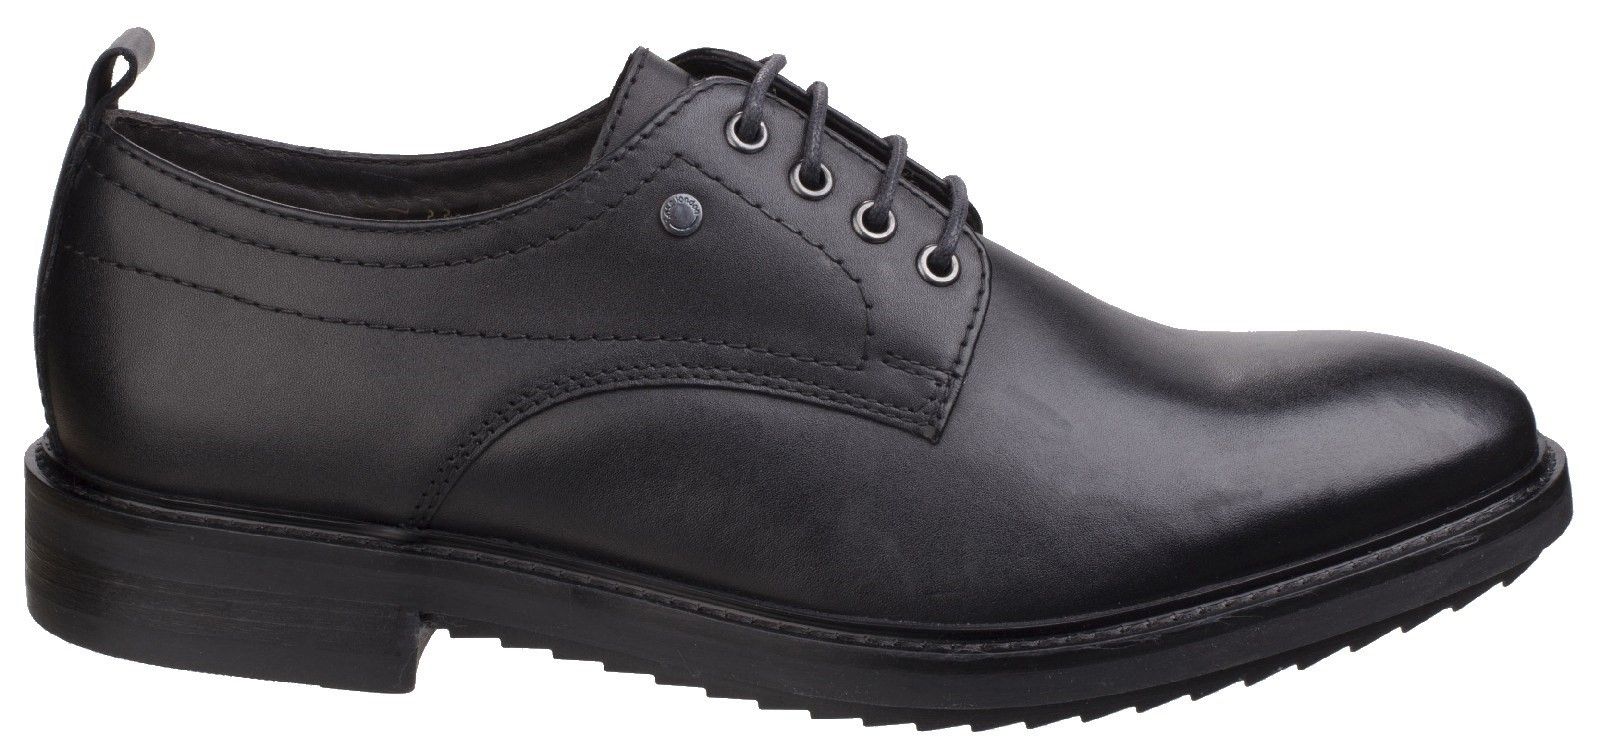 This Elba shoe style from the Actor Range, shows off a smooth leather upper, tweaked with a metal stud detail, as well as the jagged, cleated sole - gives this style the edge on your classic formal. High quality waxy leather with deep shine. 
High quality leather lining.